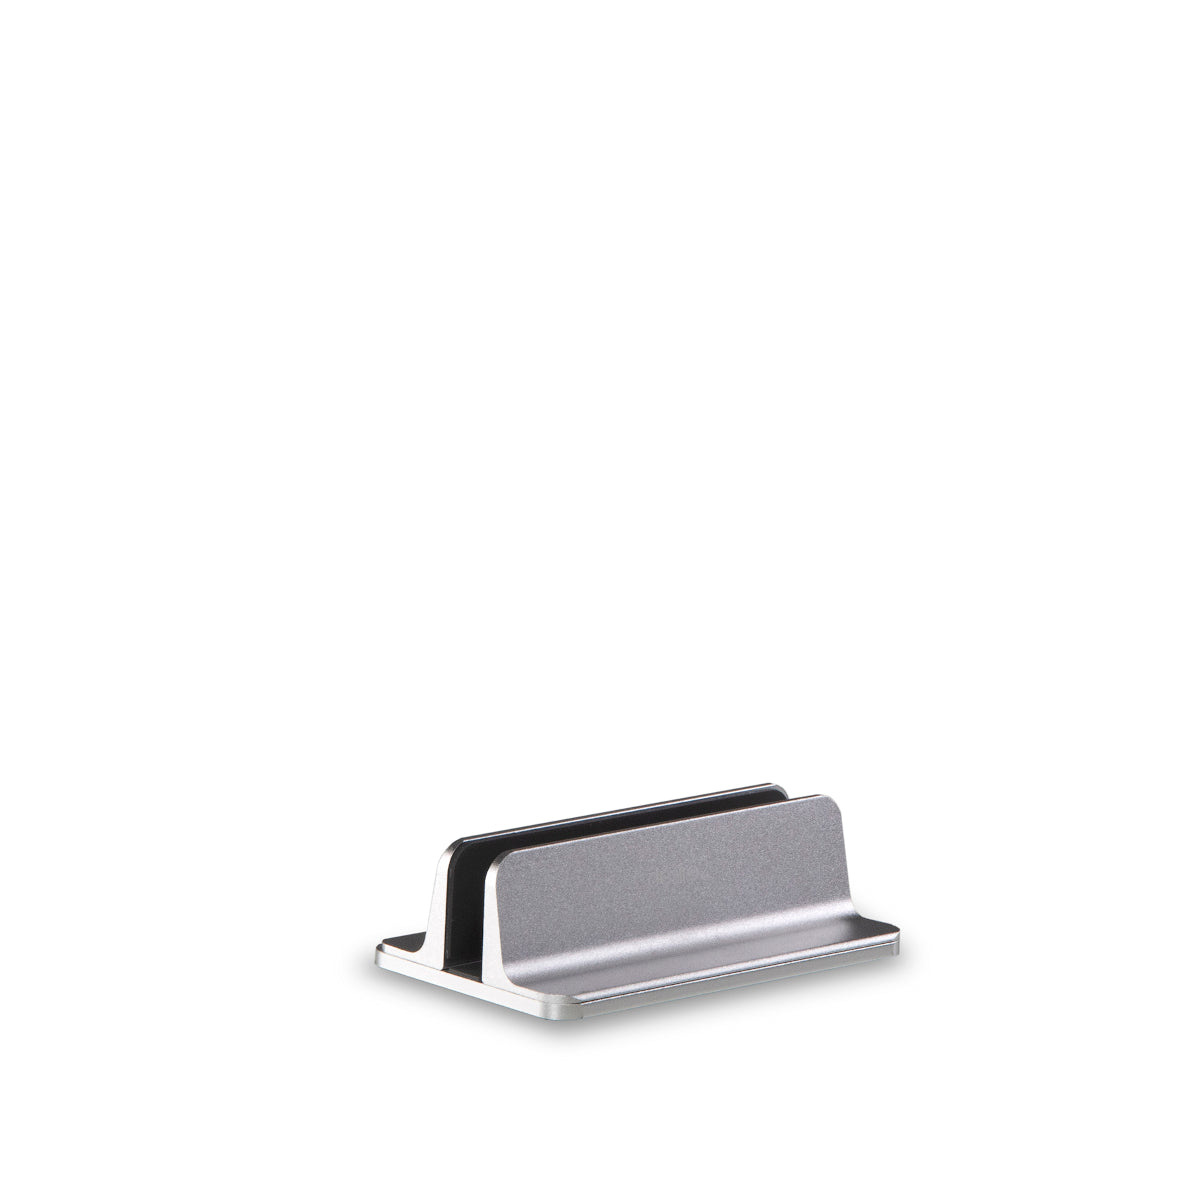 A solid aluminium laptop stand with silver finish.  Stand is design to hold laptops upright in the closed position .